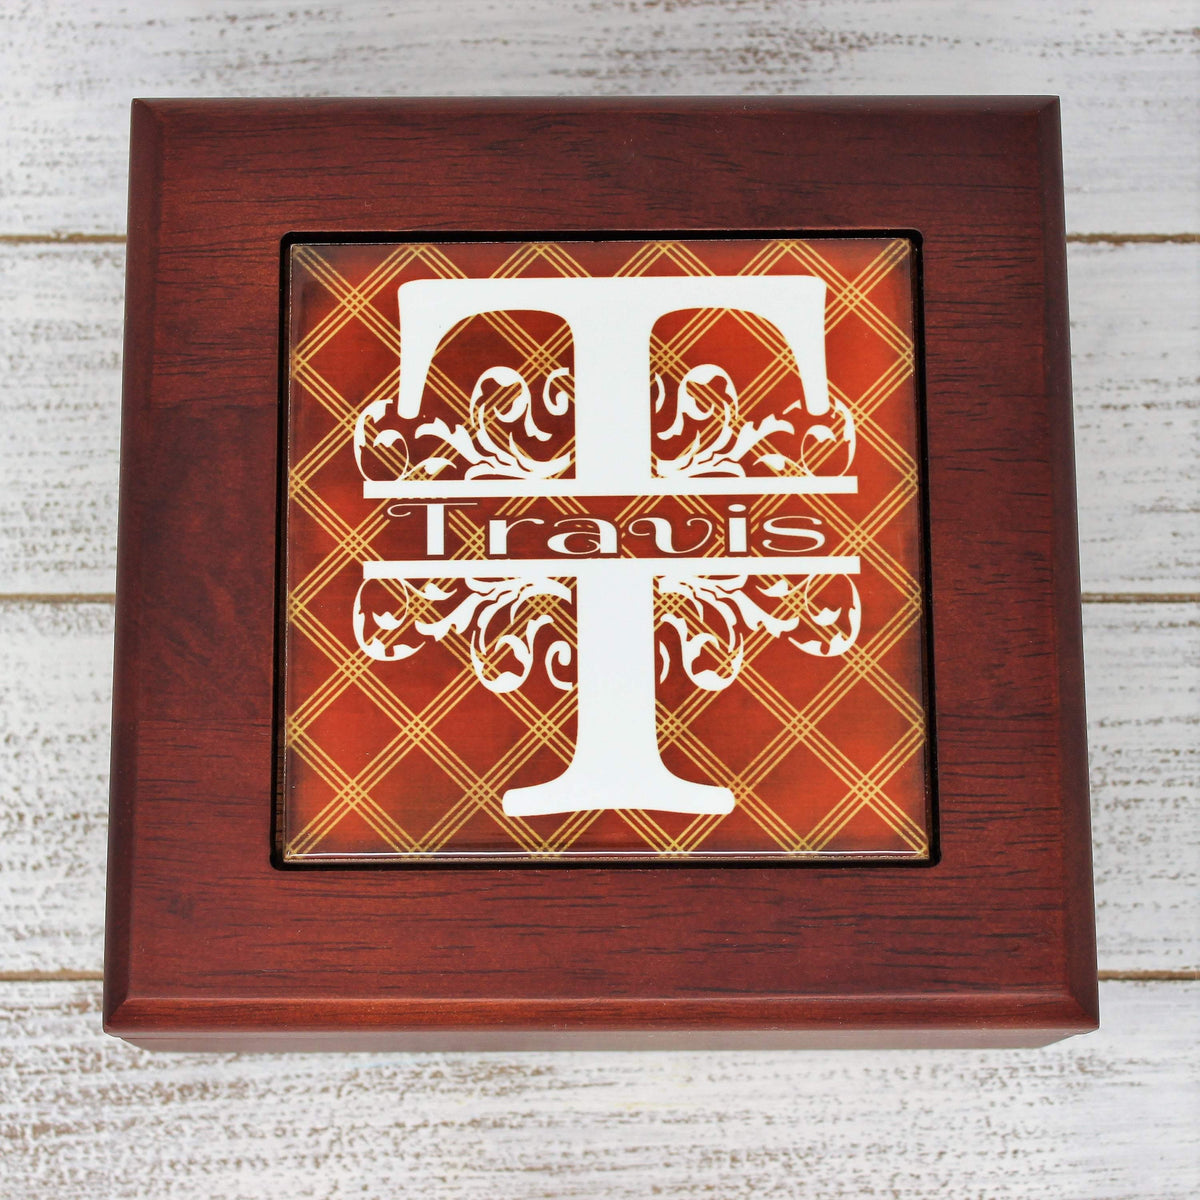 Personalized Mahogany Finished Box w/Hinge Lid | Brown Argyle - This &amp; That Solutions - Personalized Mahogany Finished Box w/Hinge Lid | Brown Argyle - Personalized Gifts &amp; Custom Home Decor